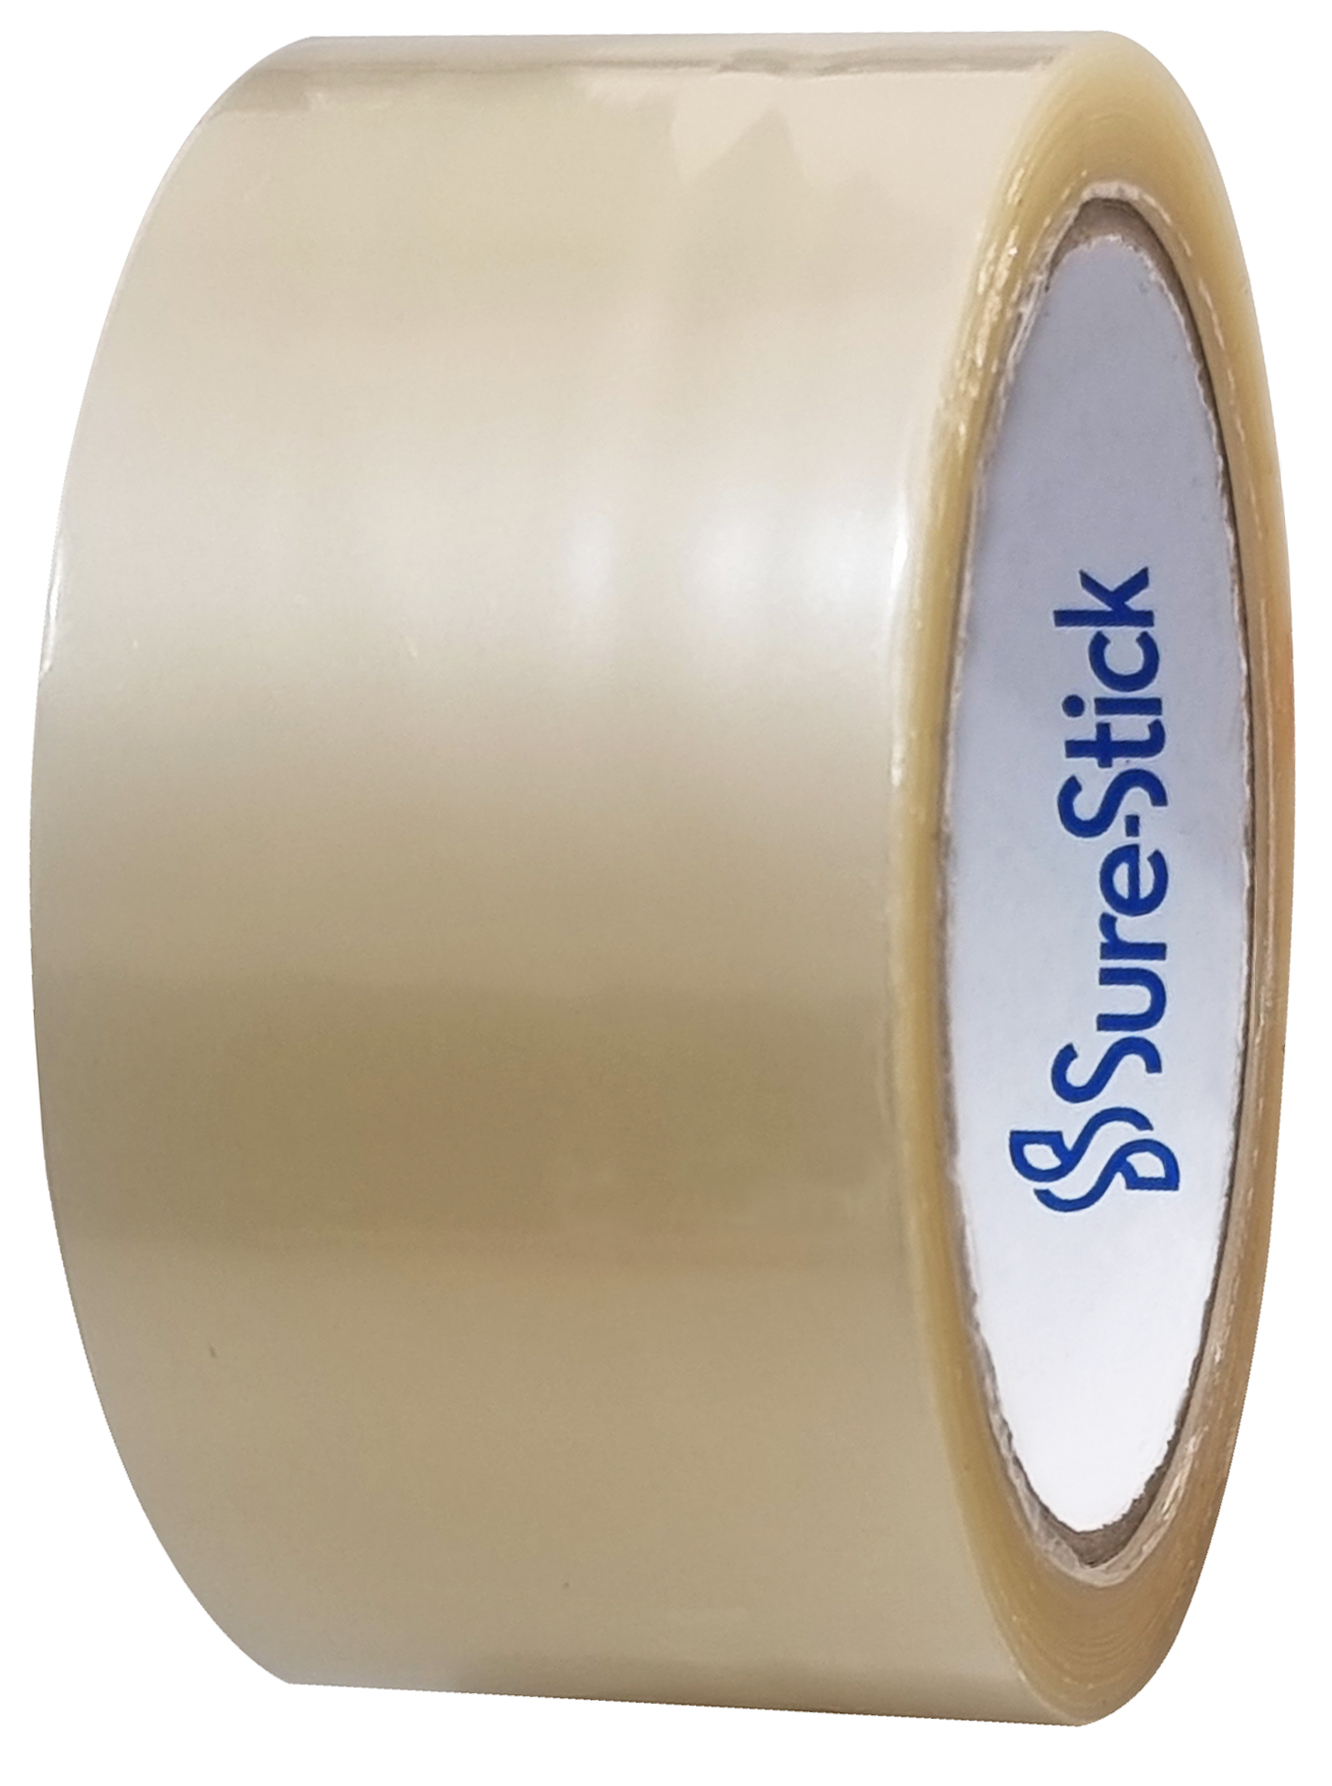 50M Super Strong Clear Filament Duct Tape Heavy Duty Waterproof